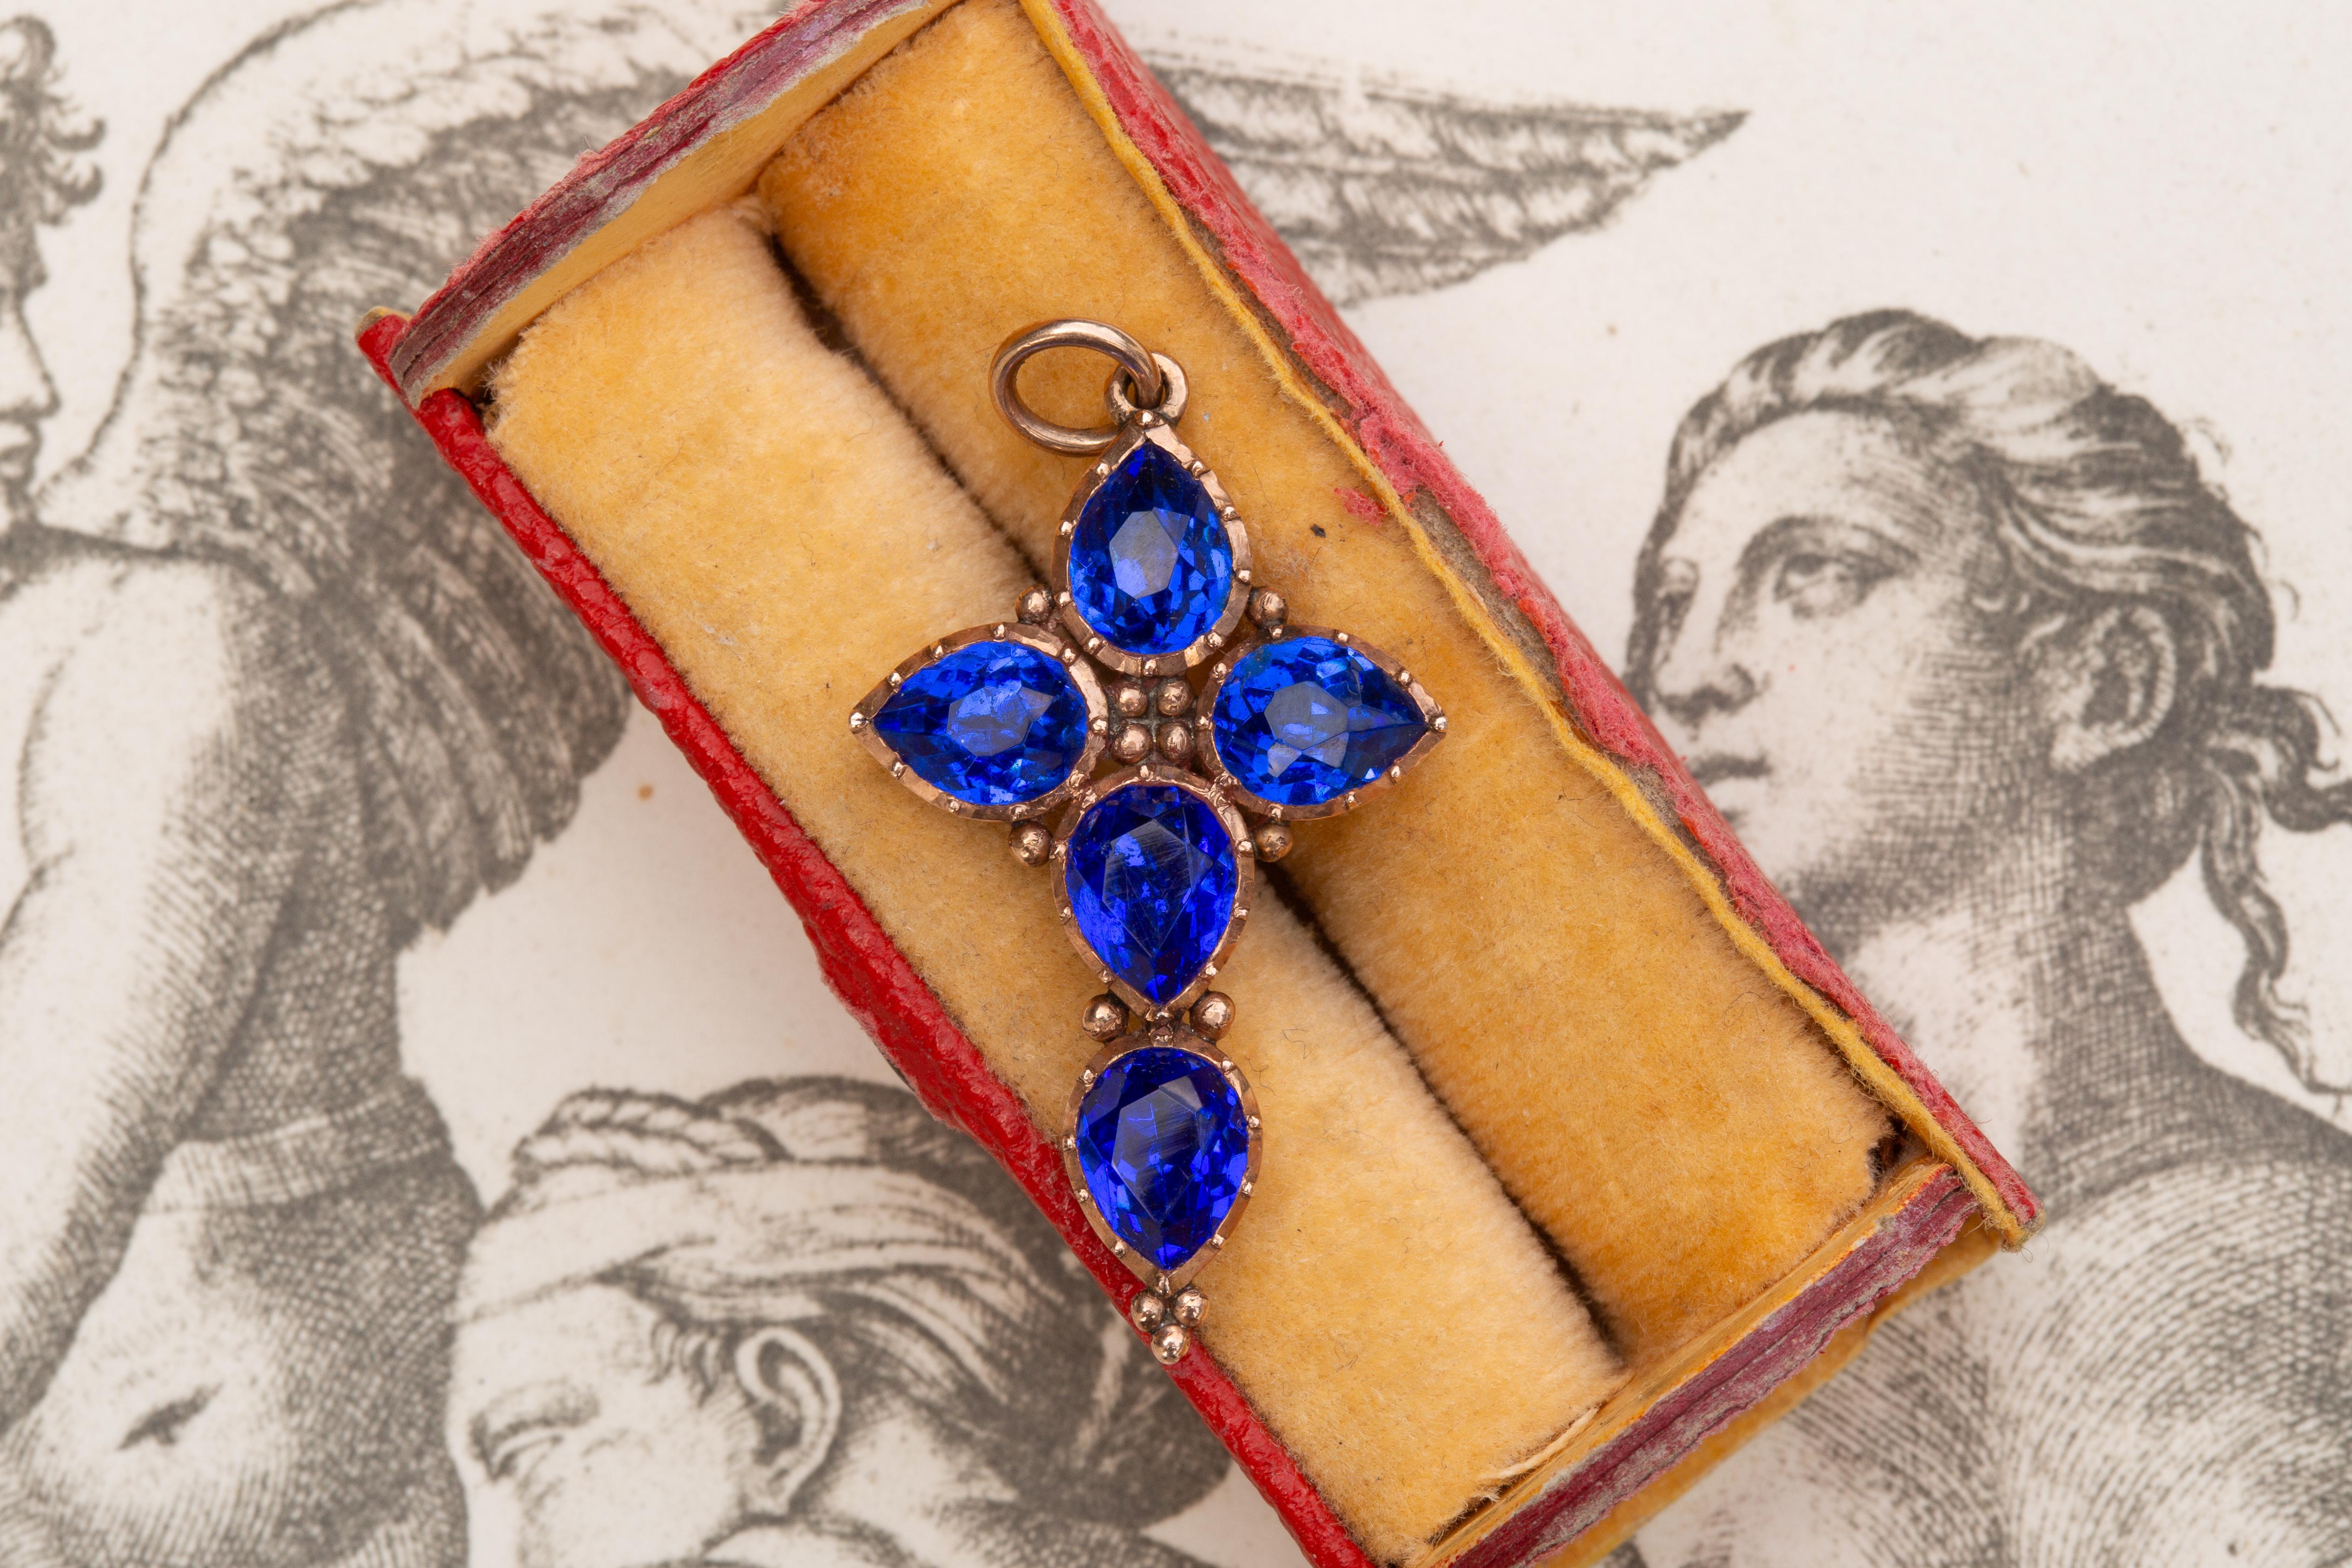 This striking antique Georgian blue paste cross pendant dates to around 1810. It is crafted in 15K rose gold and remains in truly exceptional condition despite its significant age. The beautifully faceted and foil-backed pastes display a luminous